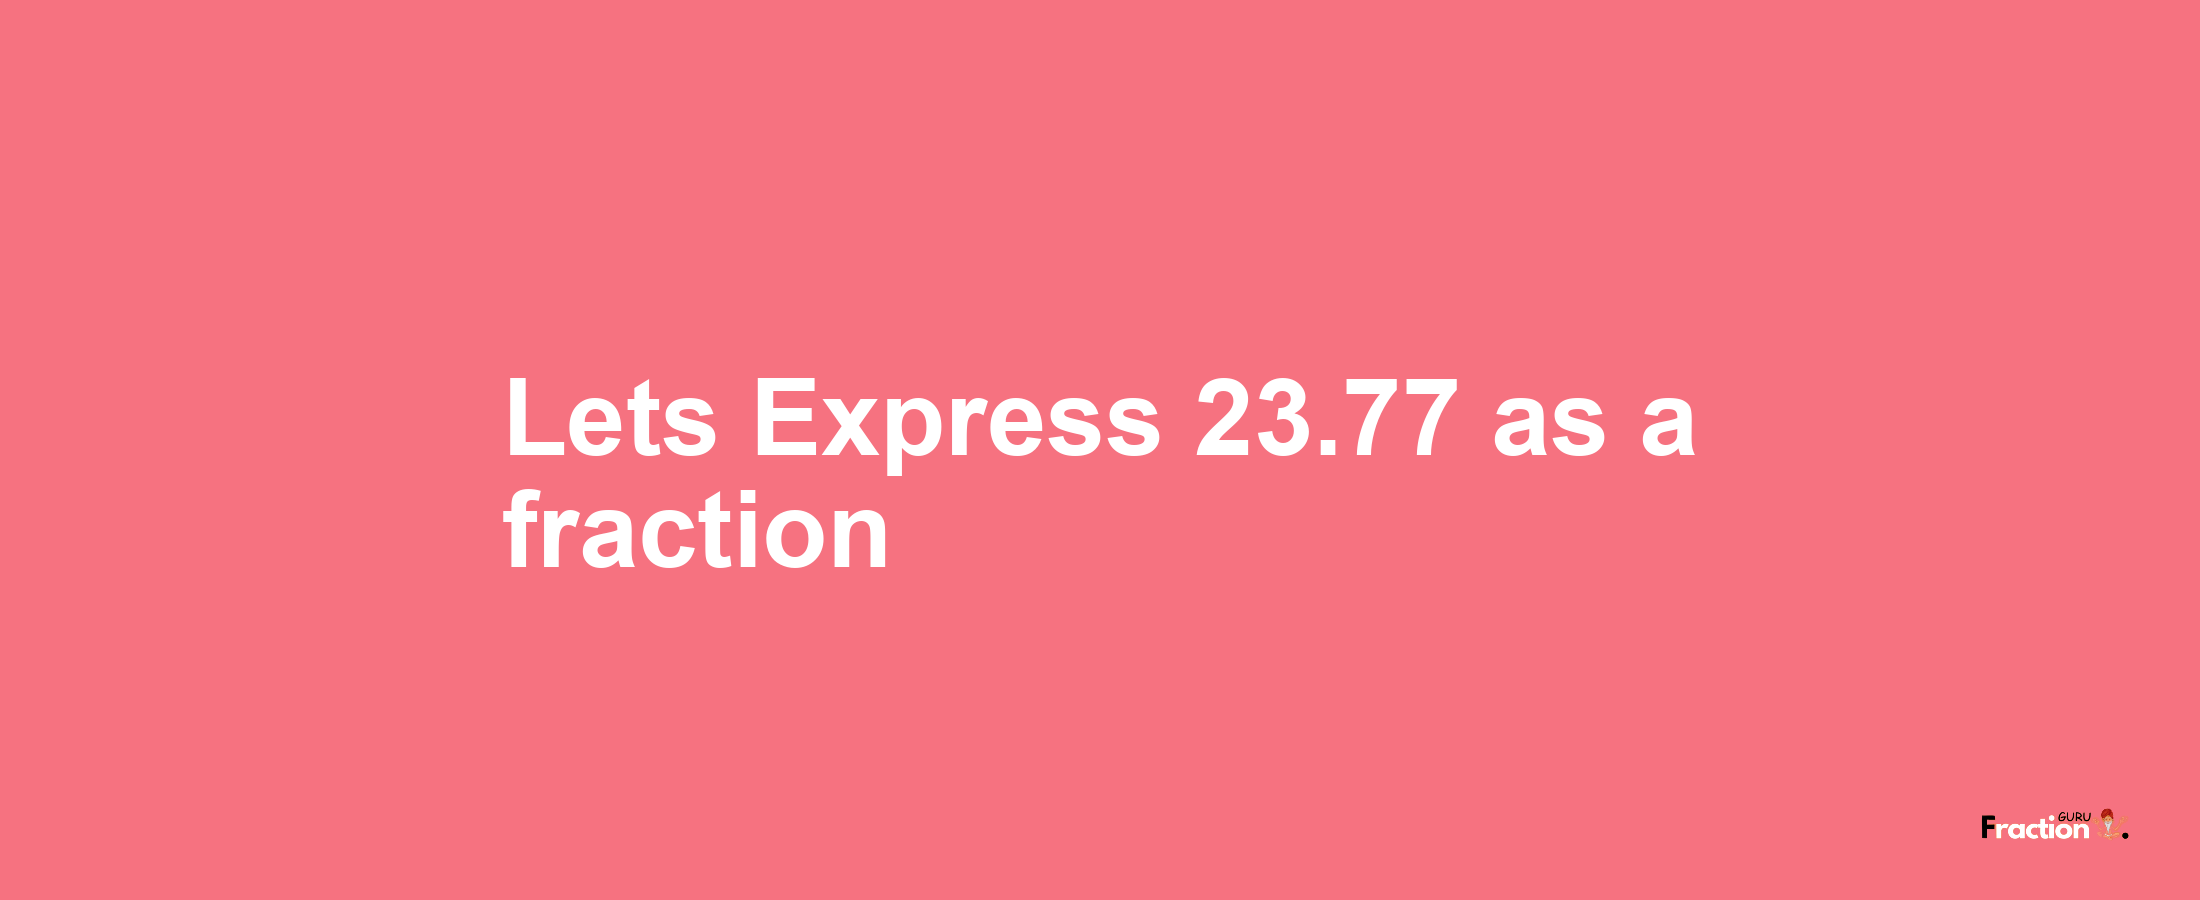 Lets Express 23.77 as afraction